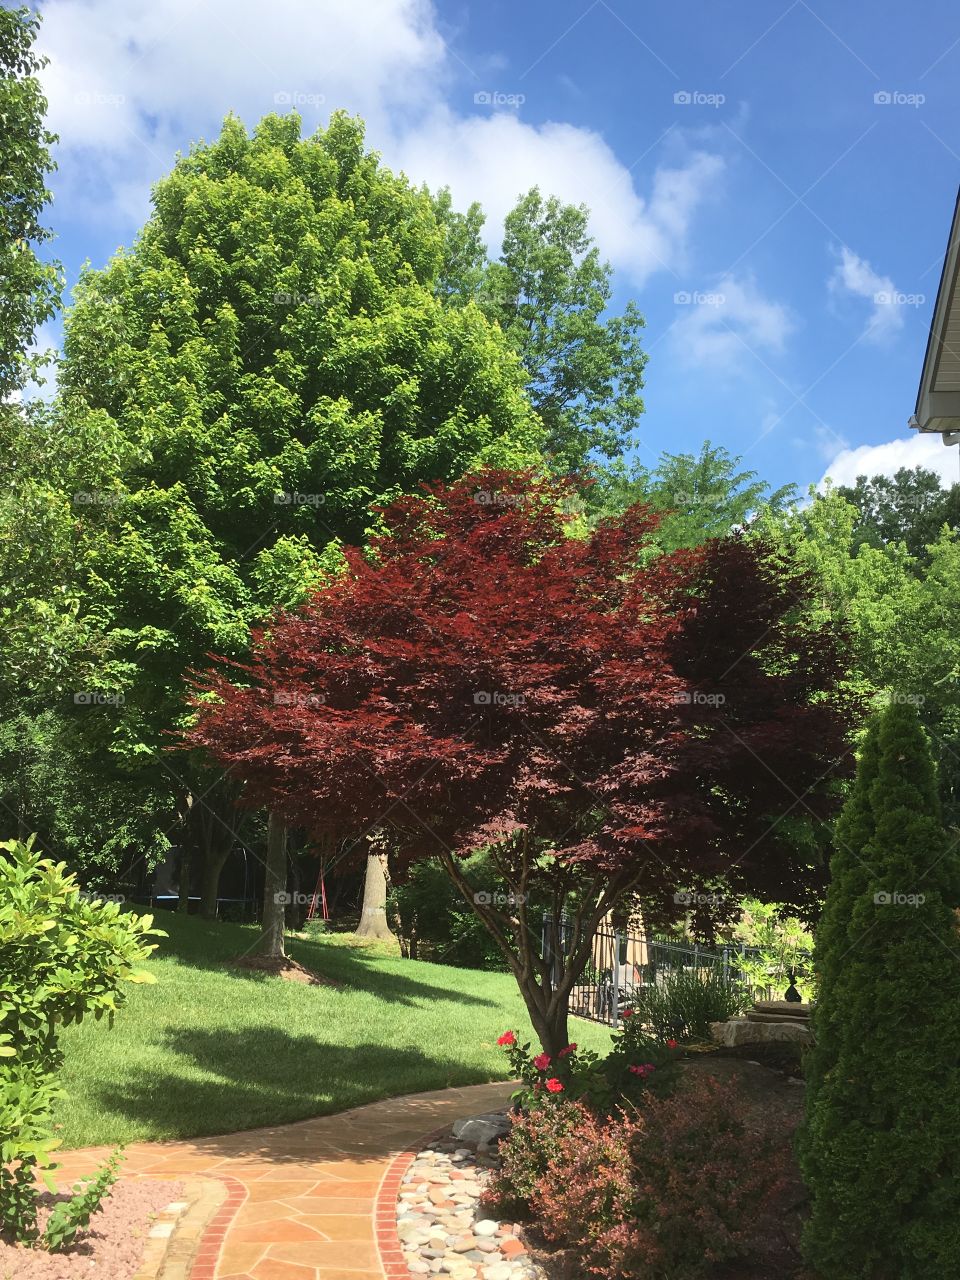 Japanese red and October glory maple trees in summer